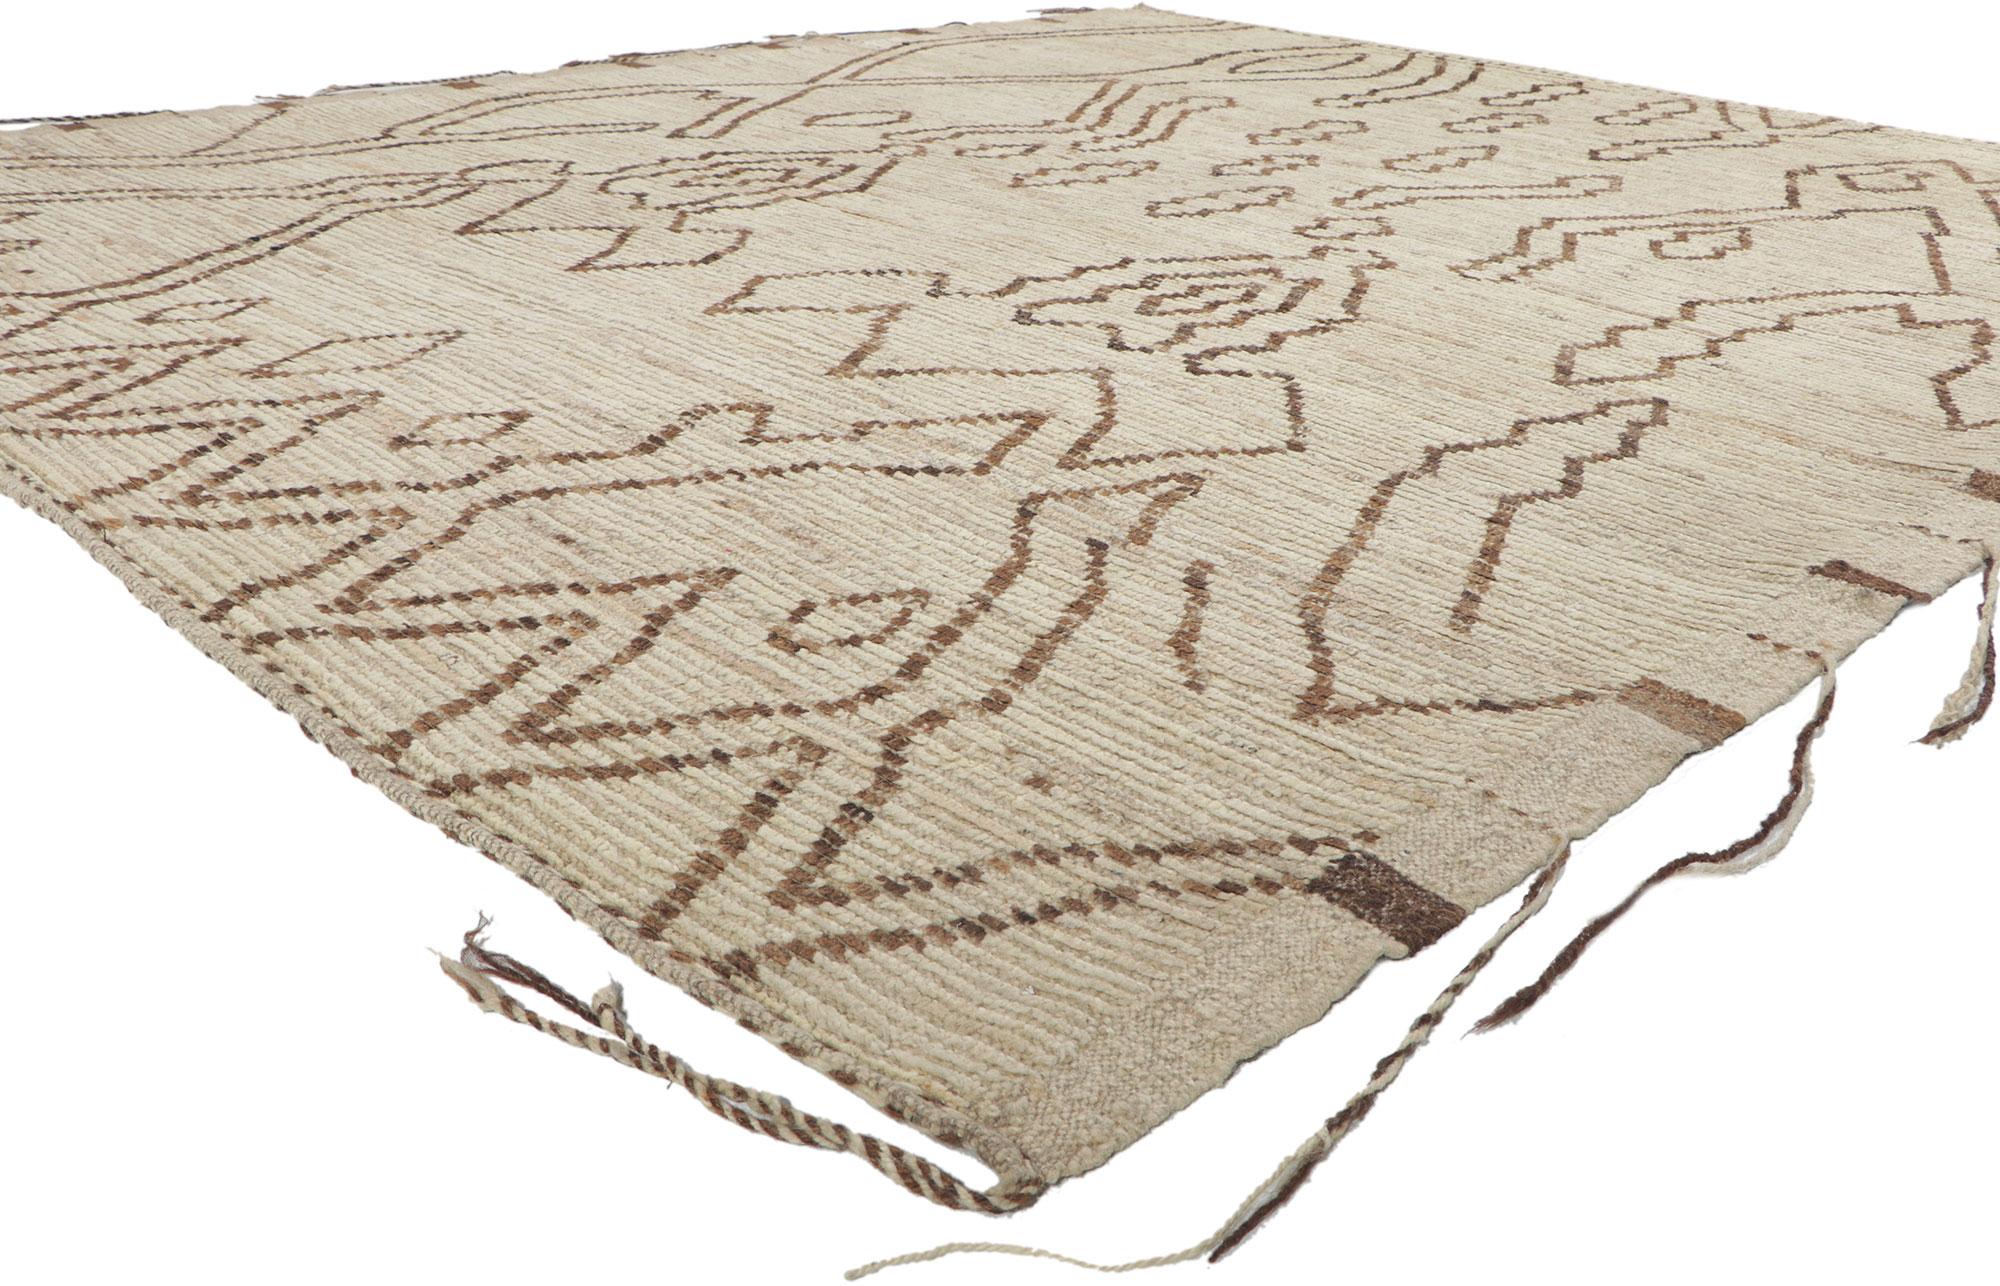 80797 new Contemporary Moroccan rug, 08'06 x 09'10. Showcasing an expressive design, incredible detail and texture, this hand knotted wool Moroccan style rug is a captivating vision of woven beauty. The eye-catching tribal pattern and earthy